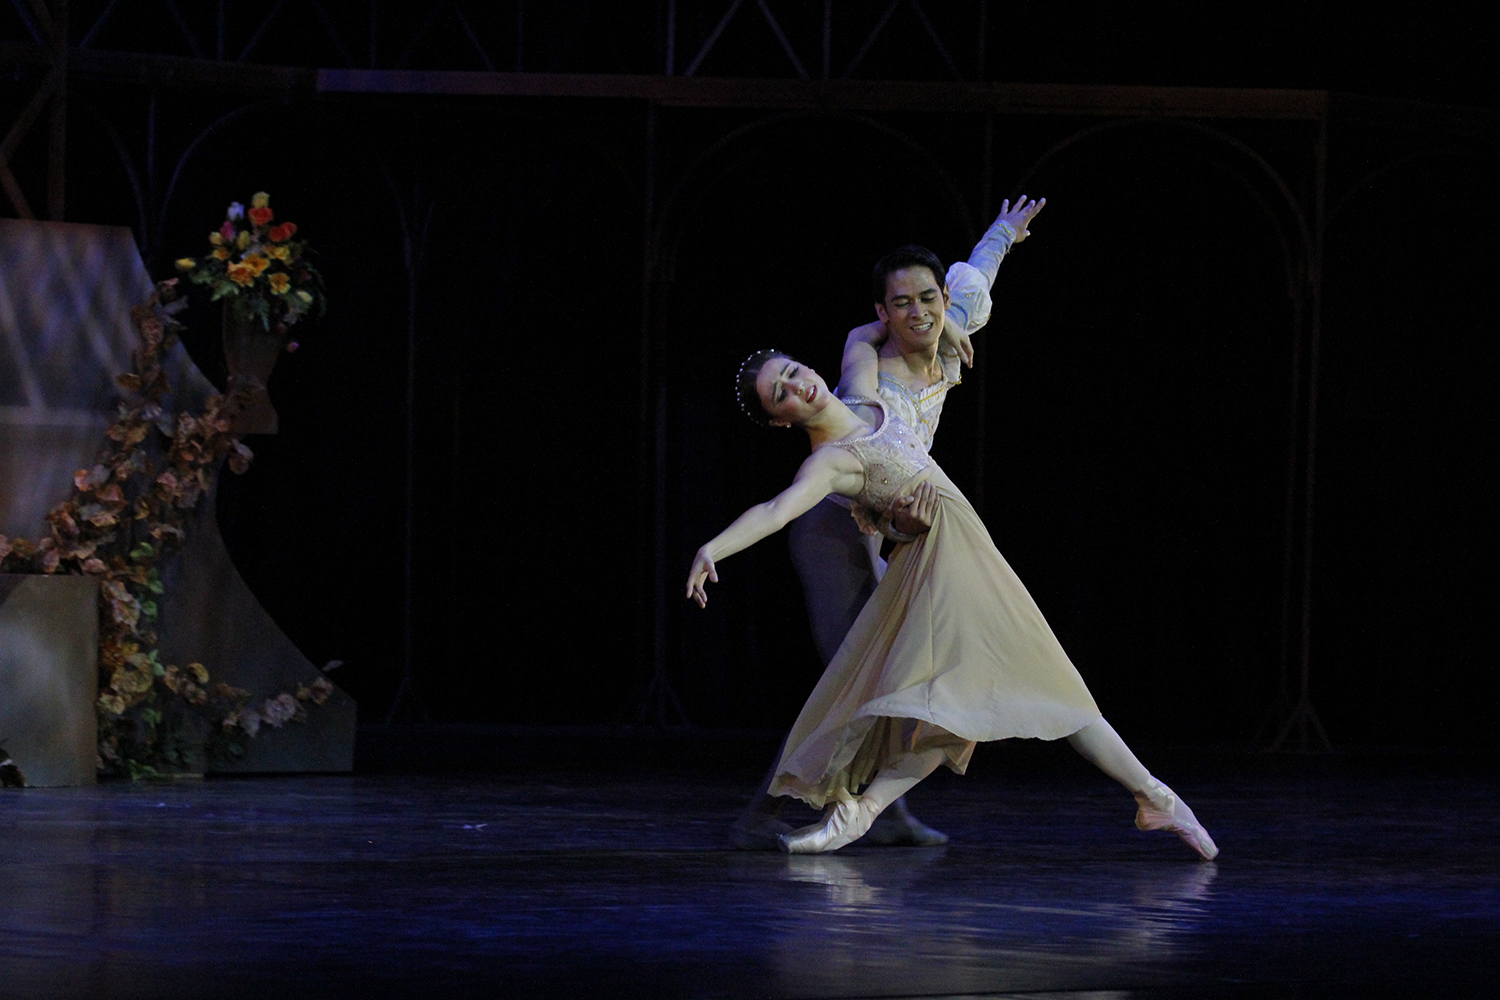 Katherine Barkman and Rudy De Dios both earned nominations for Outstanding Female and Outstanding Male Lead Performance in Classical Dance for BM’s full-length Romeo & Juliet.